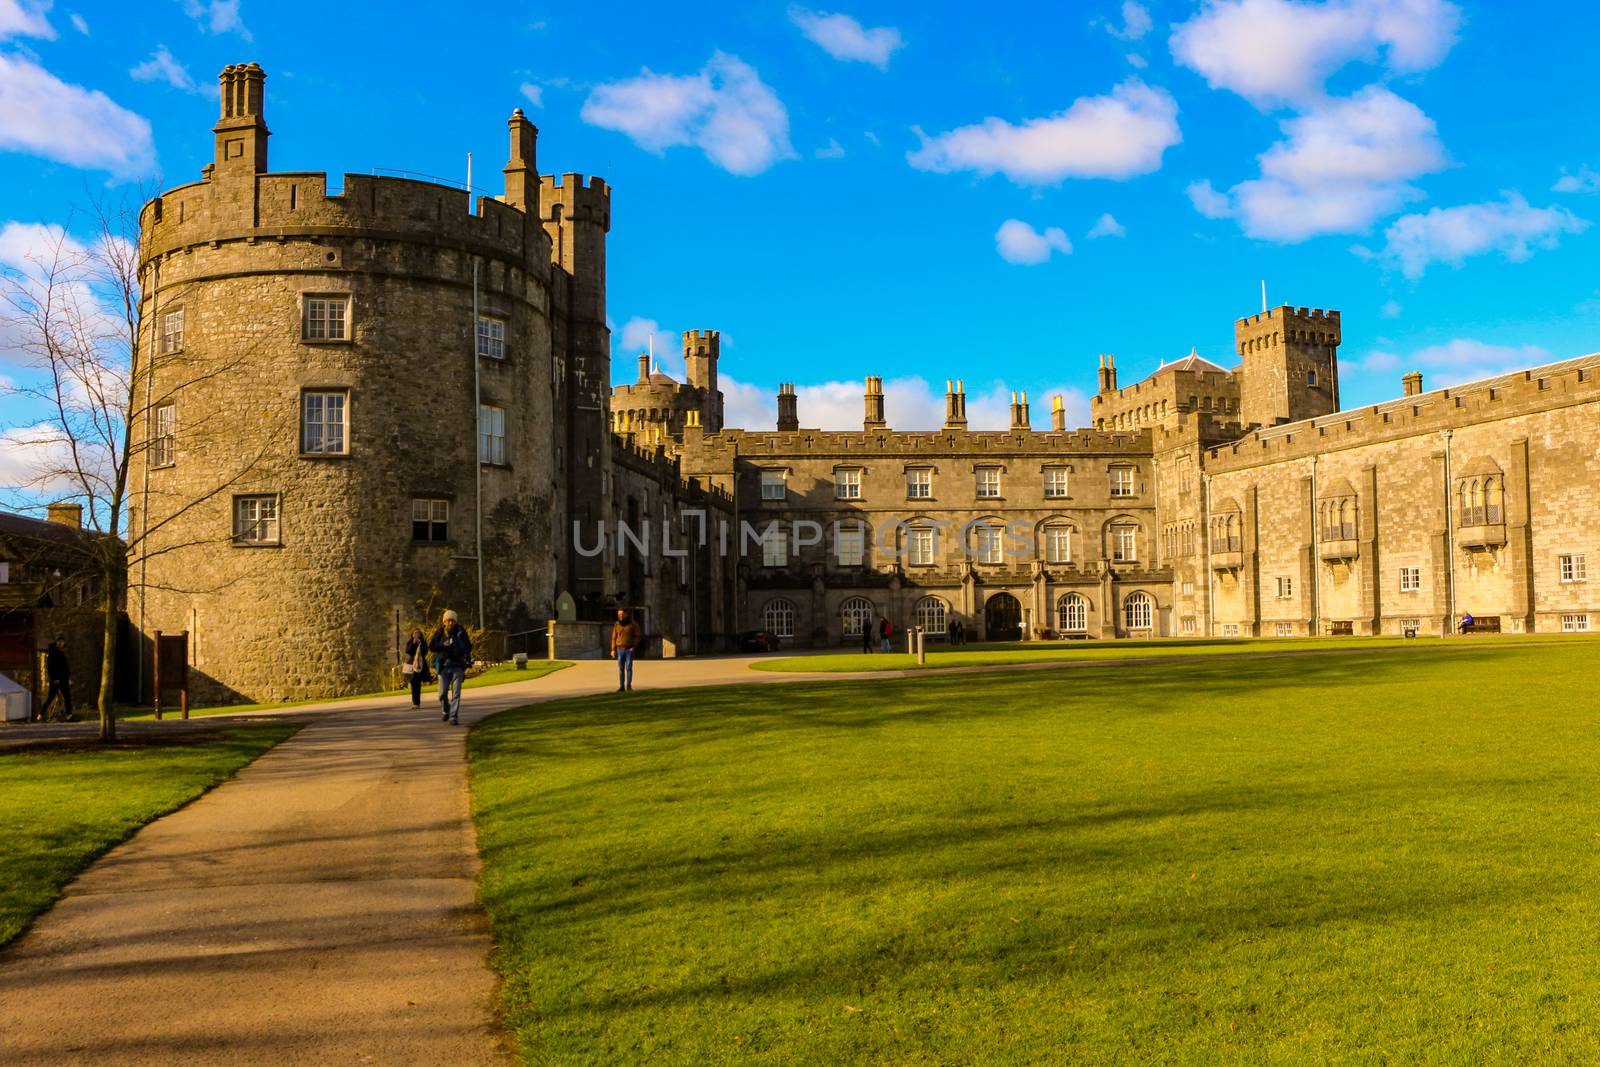 Kilkenny Castle. Historic landmark in the town of Kilkenny in Ireland. Ireland has many castles but this one is well known as a tourist destination spot and offers internal tours and historic lessons. The town of kilkenny is known as the midevil city.